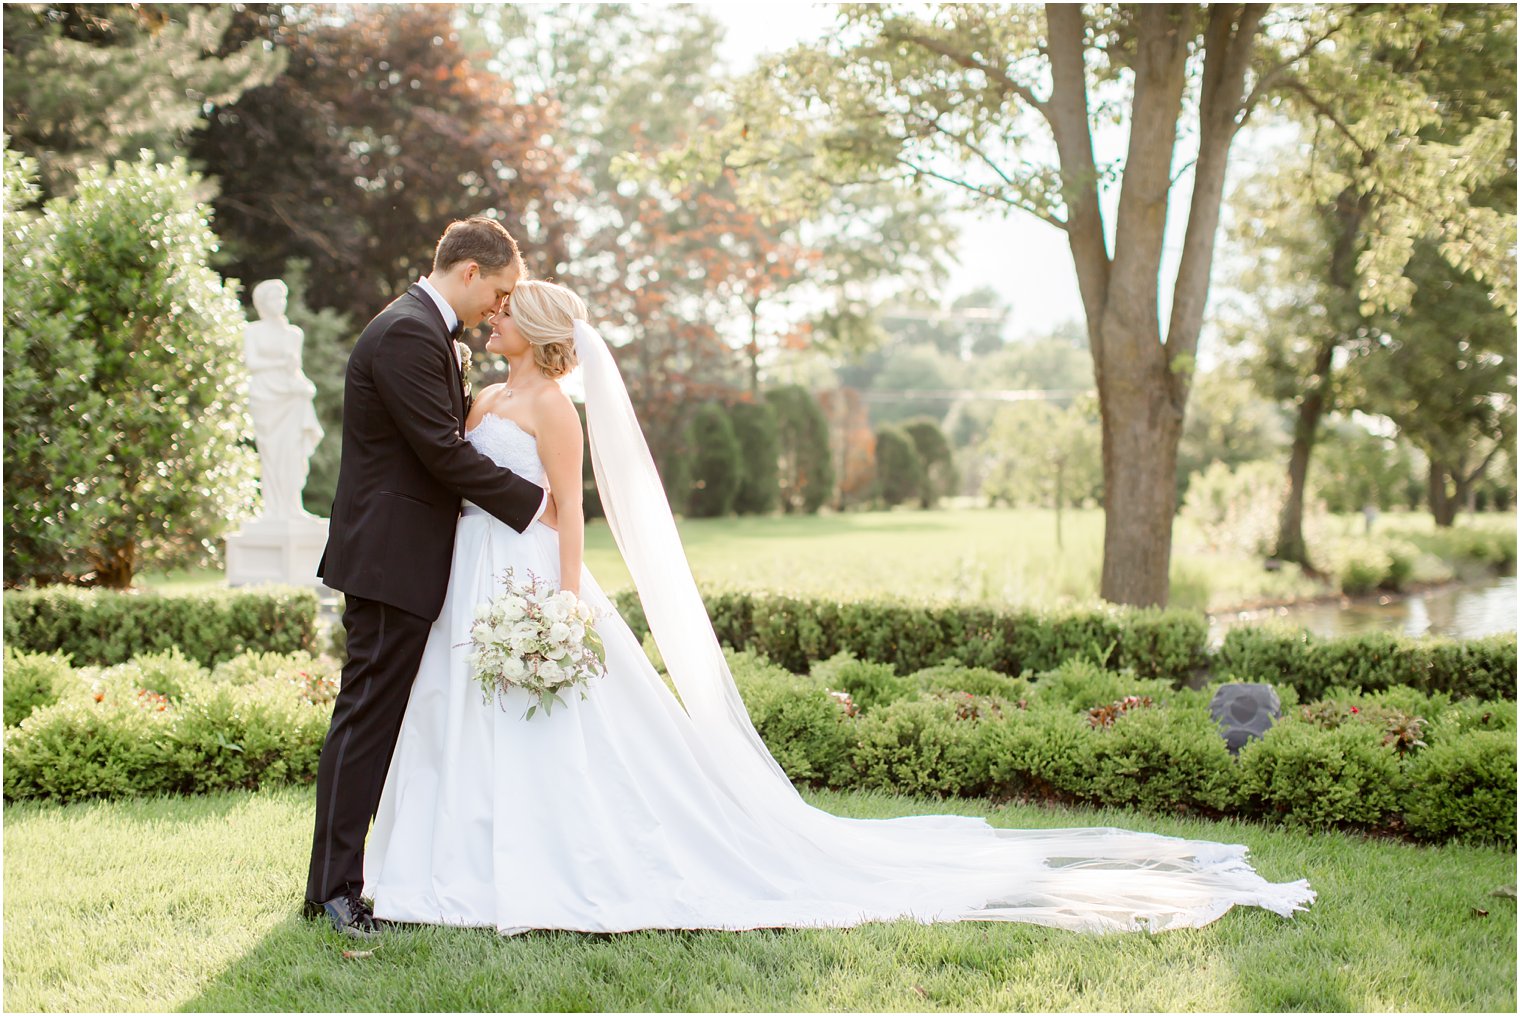 Bride and groom Portraits at Park Chateau Estate 